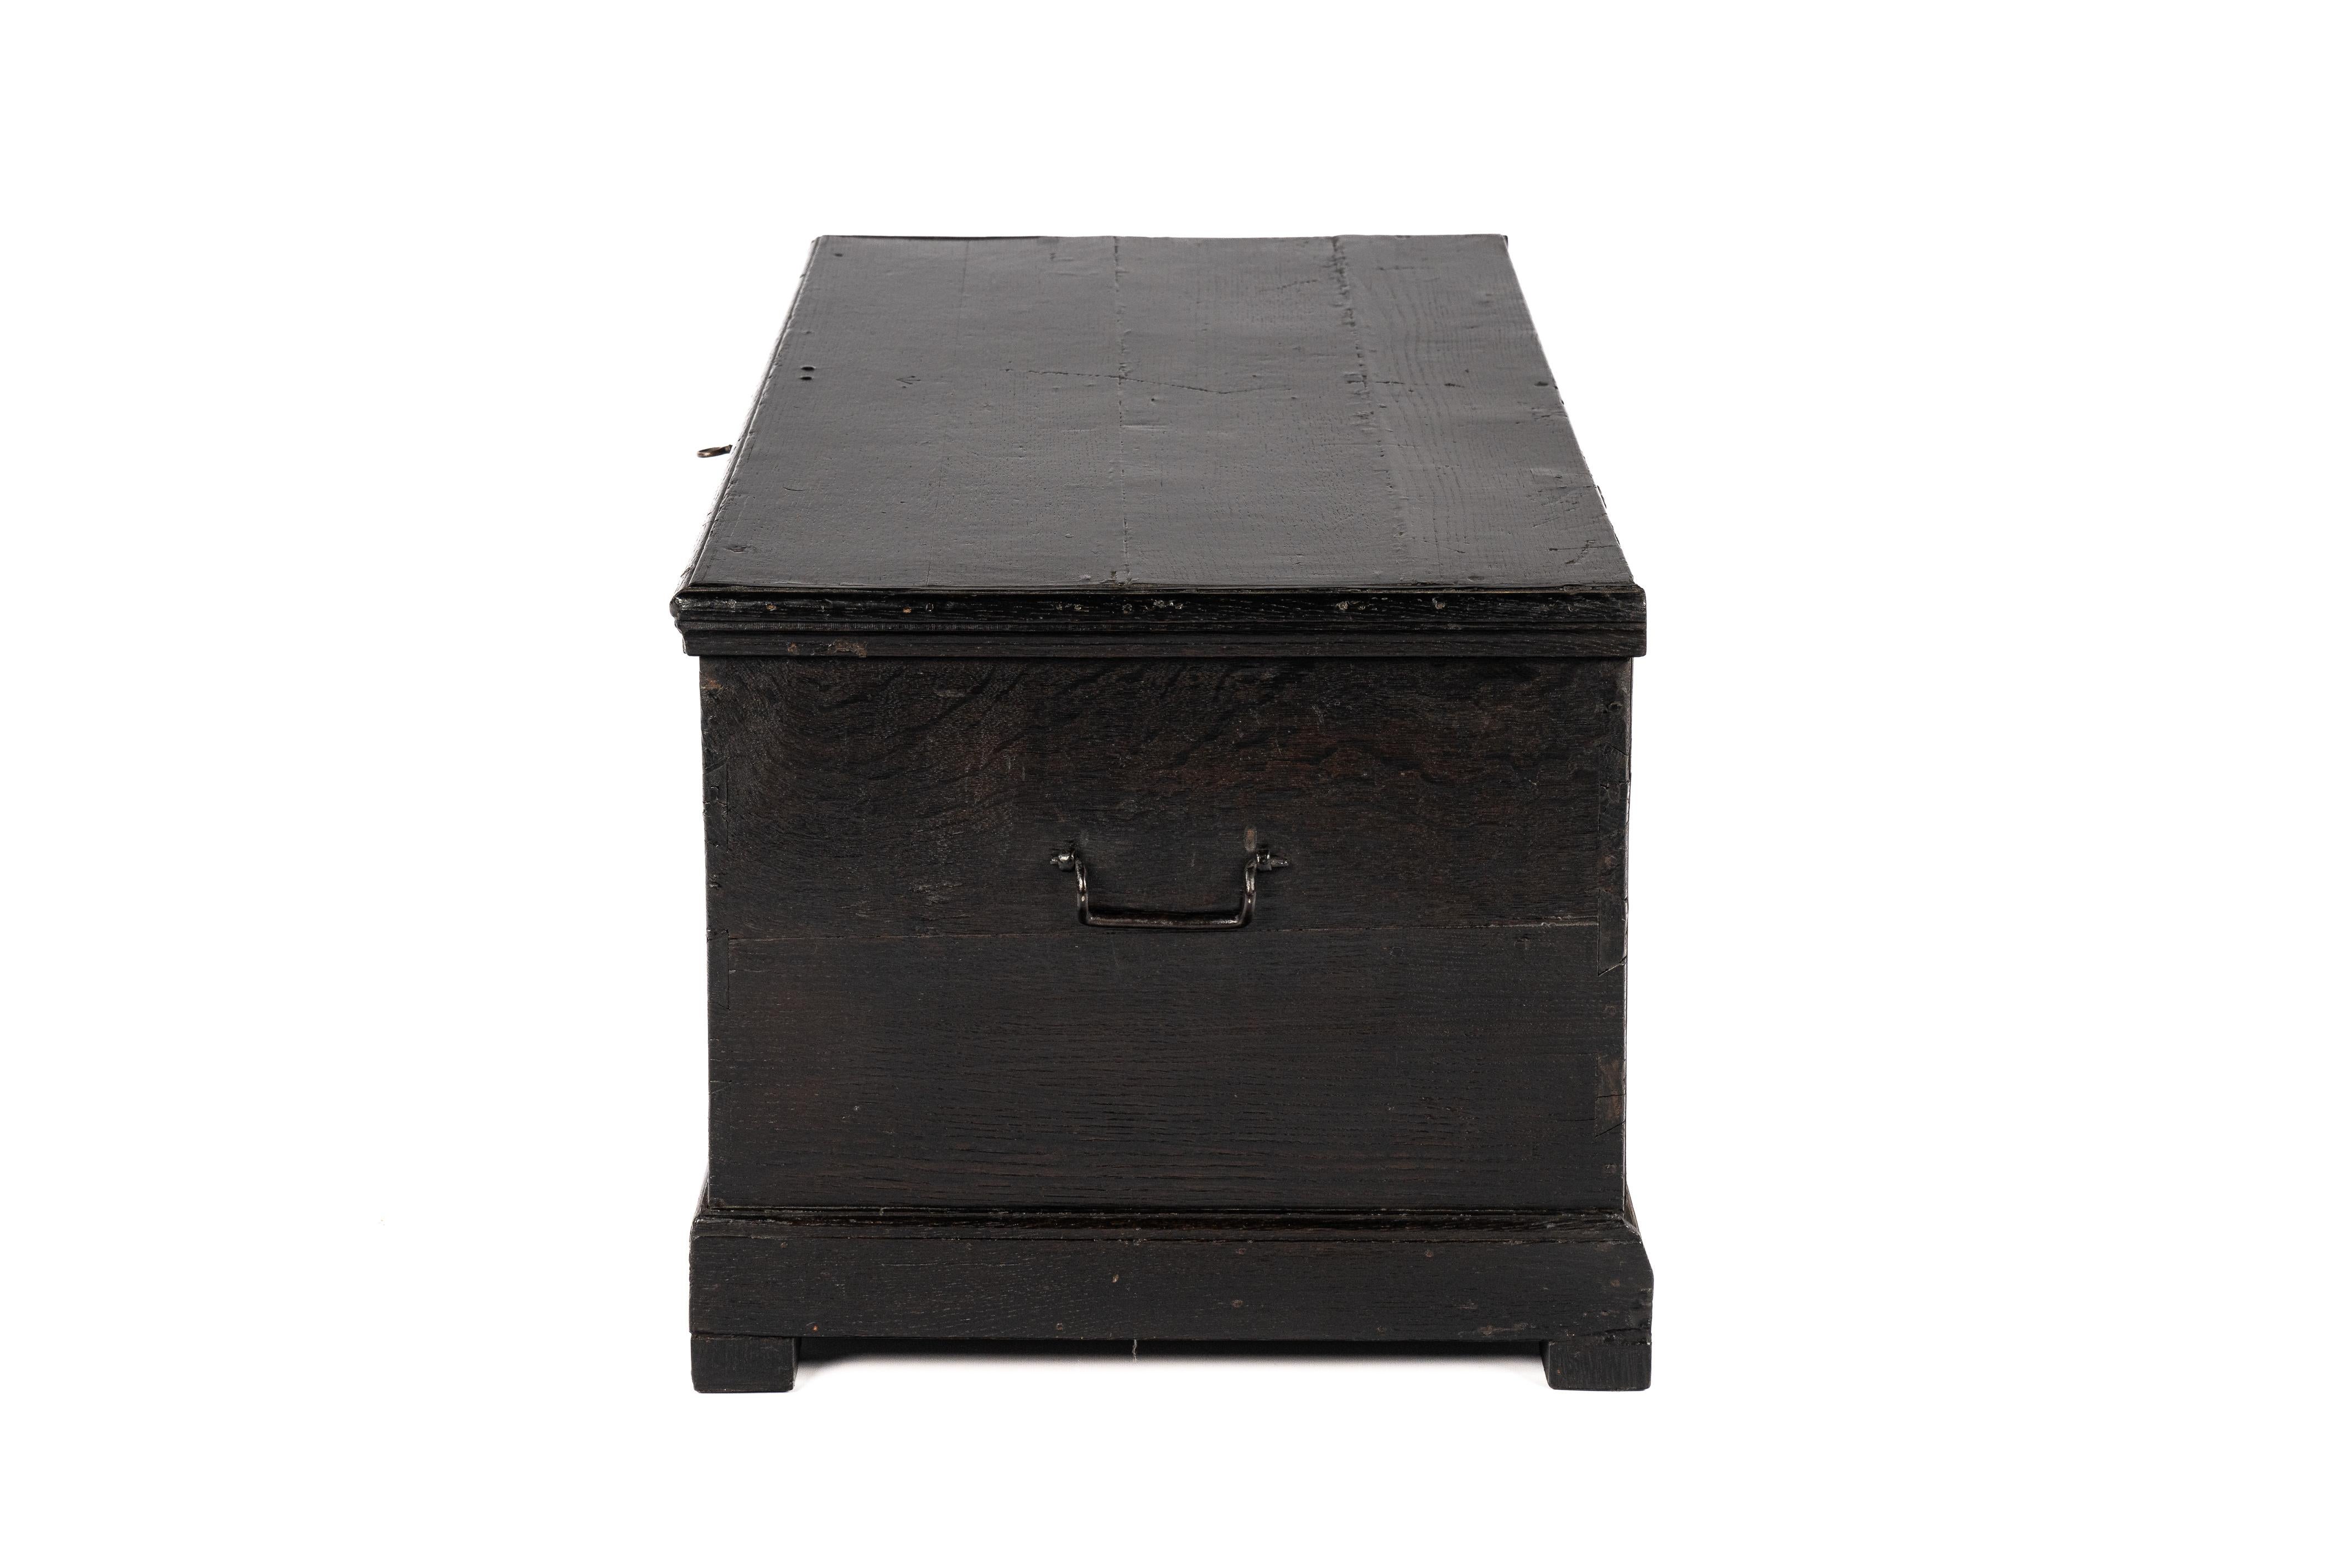 Lacquered Antique 19th-century West German black oak blanket chest trunk or coffer For Sale